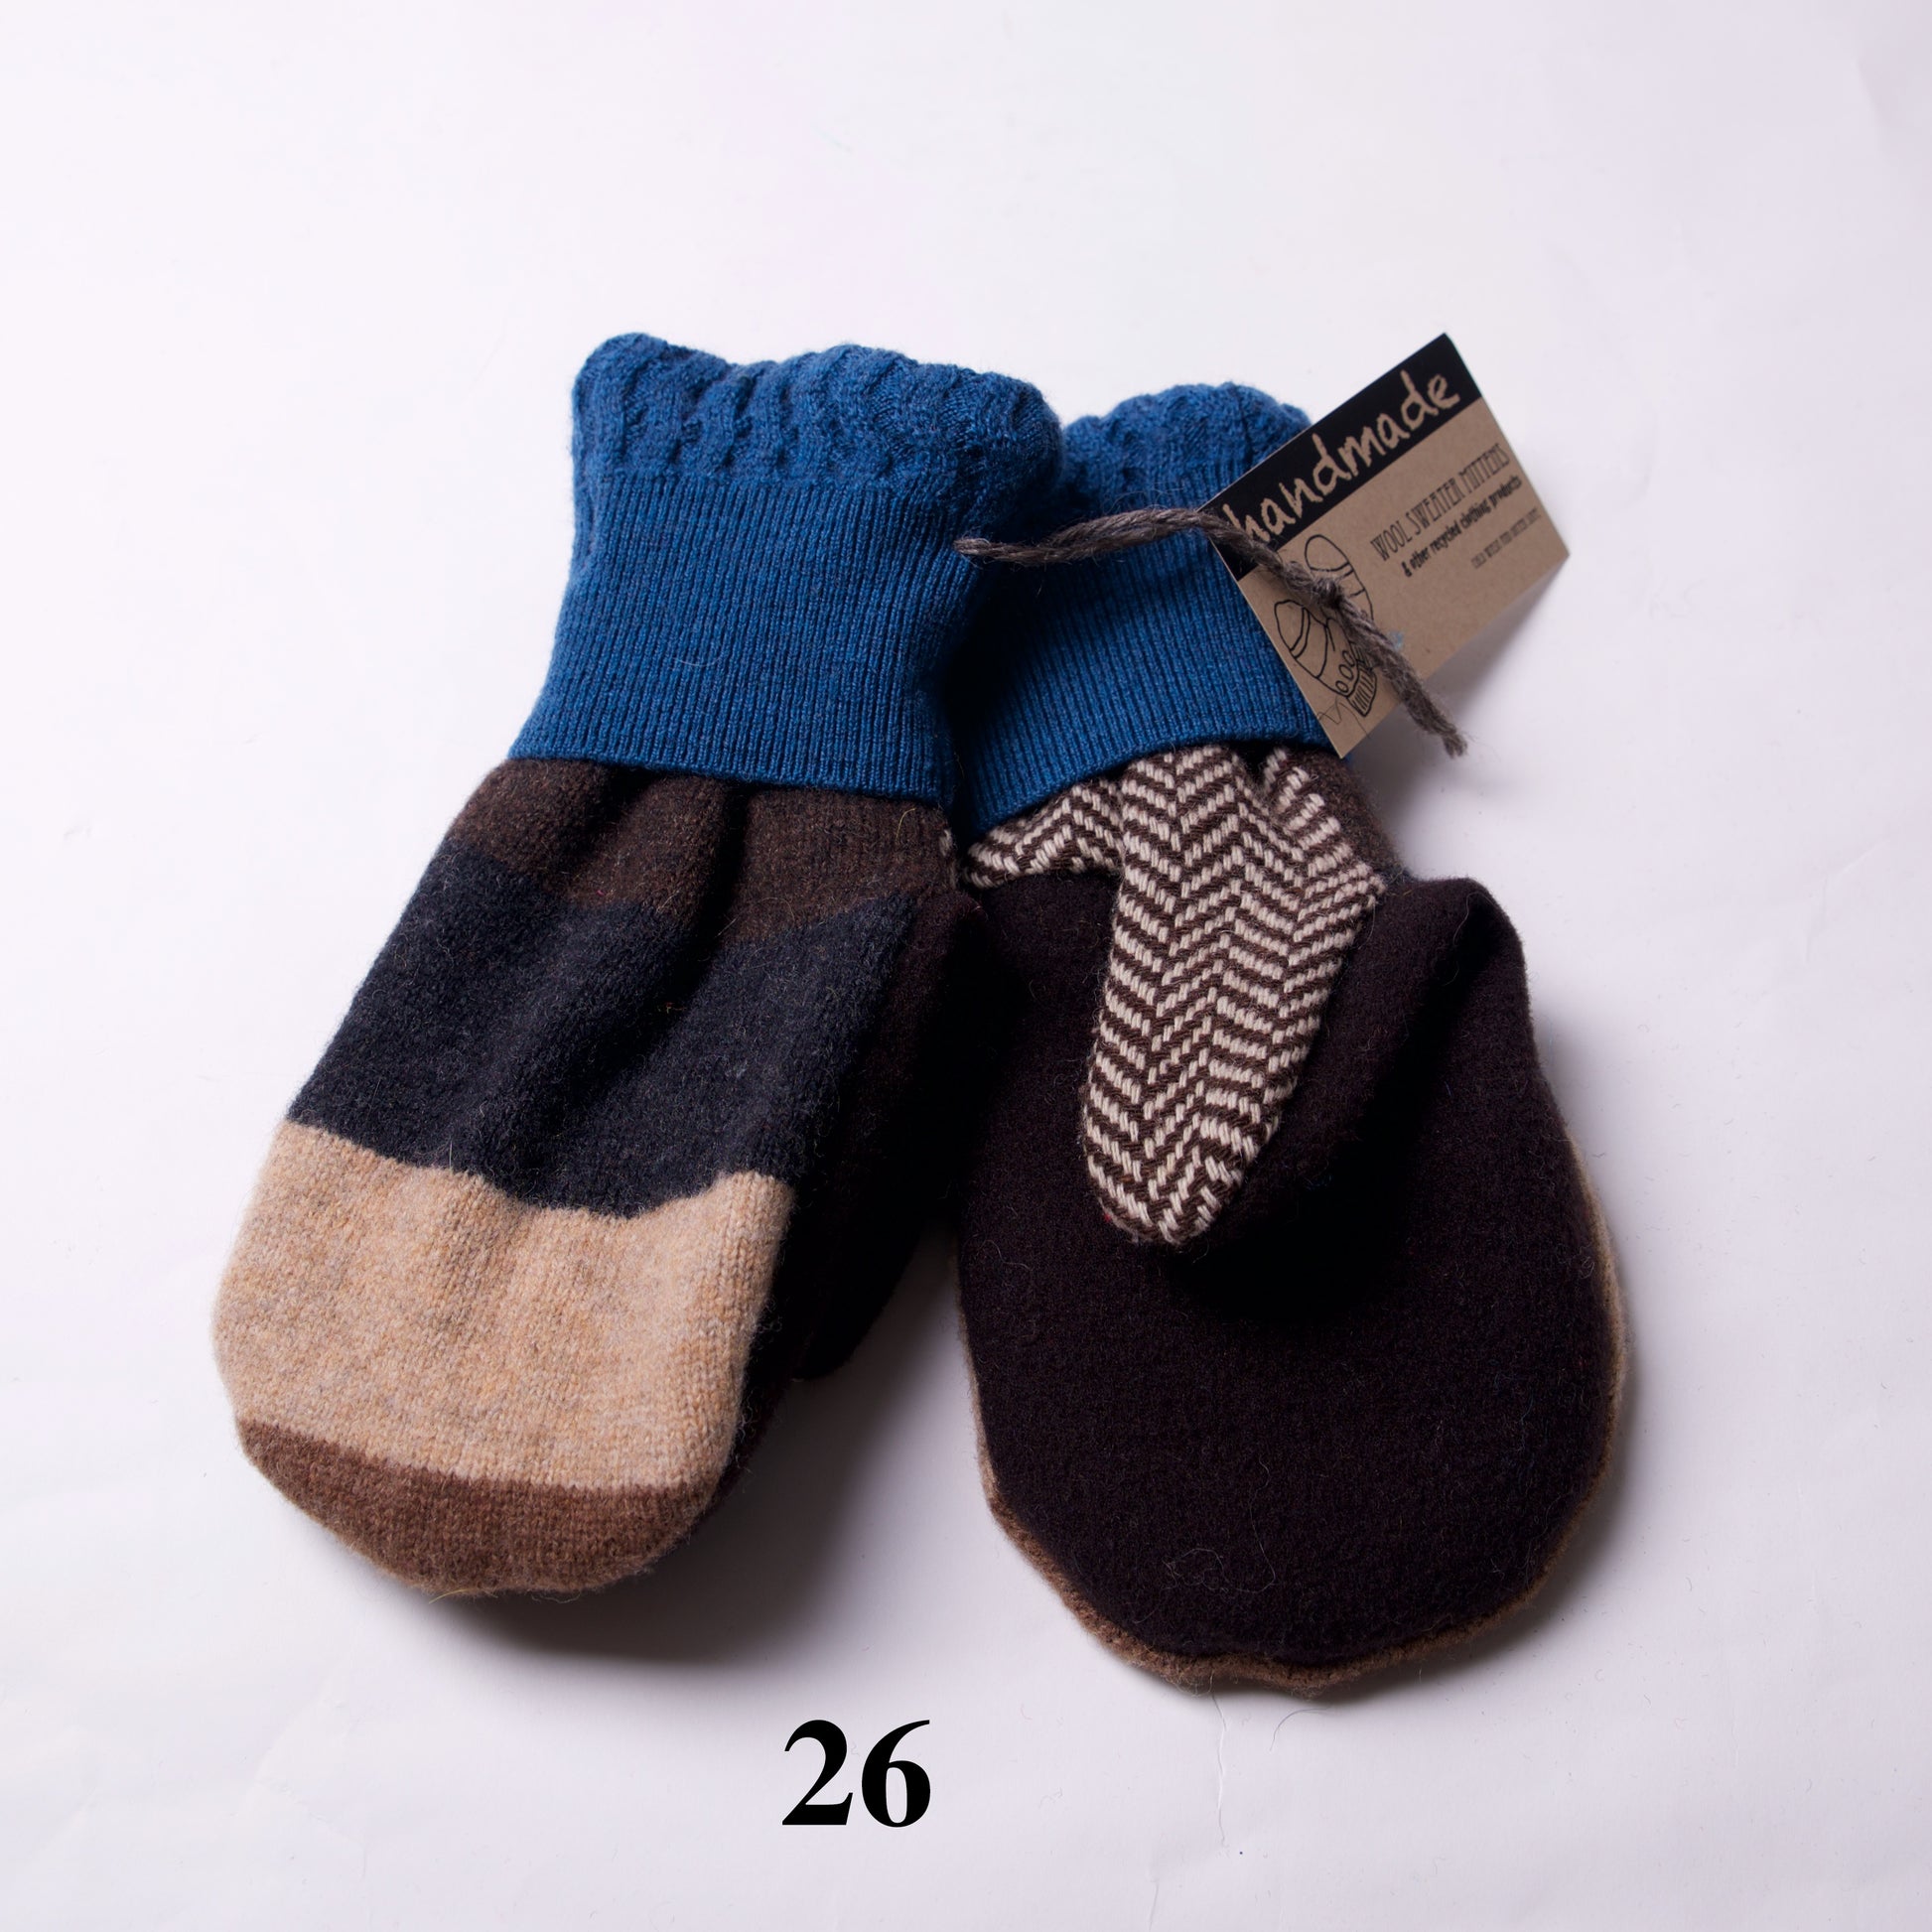 Wool Sweater Upcycled Mittens by Elaine Olson - © Blue Pomegranate Gallery